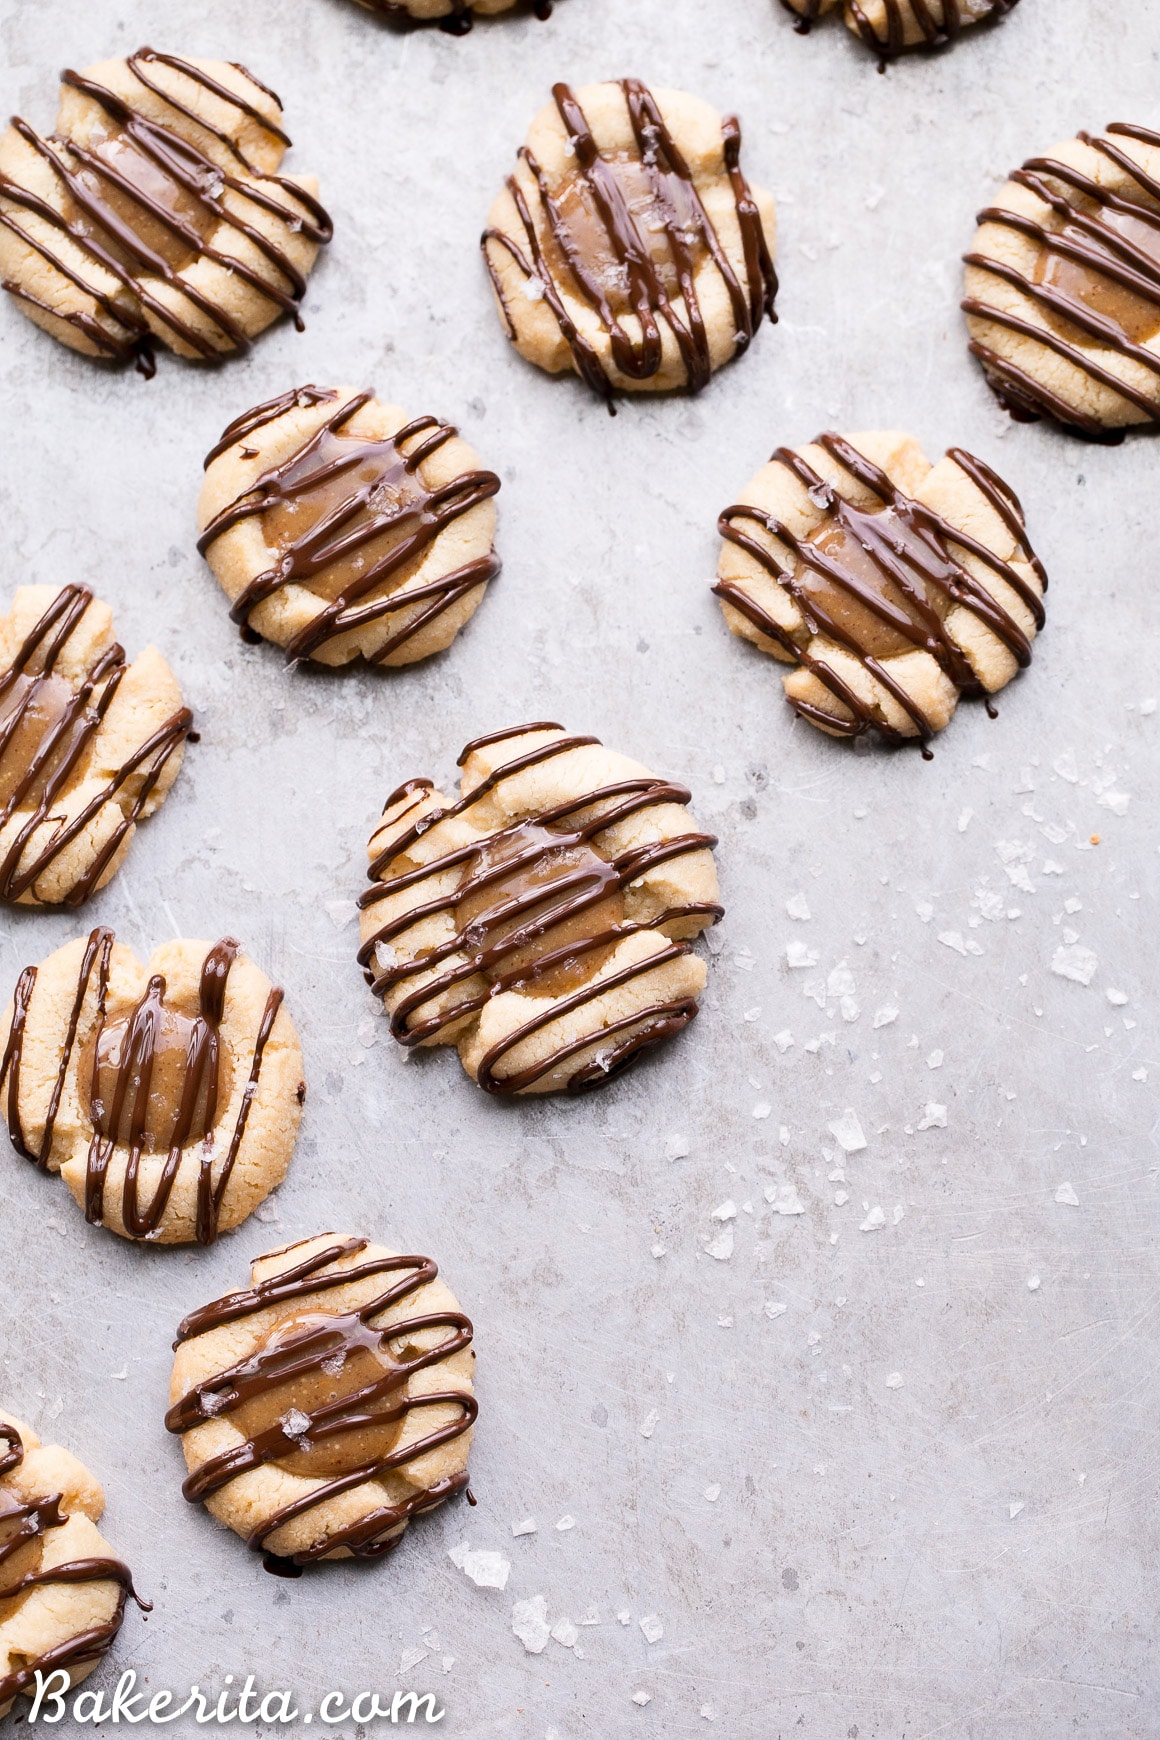 These Salted Caramel Thumbprint Cookies are super easy to make with only 6 ingredients total! The tender gluten-free and Paleo shortbread cookies are filled with a no-cook vegan caramel and topped off with a dark chocolate drizzle and flaky sea salt. They're perfect for the holidays!